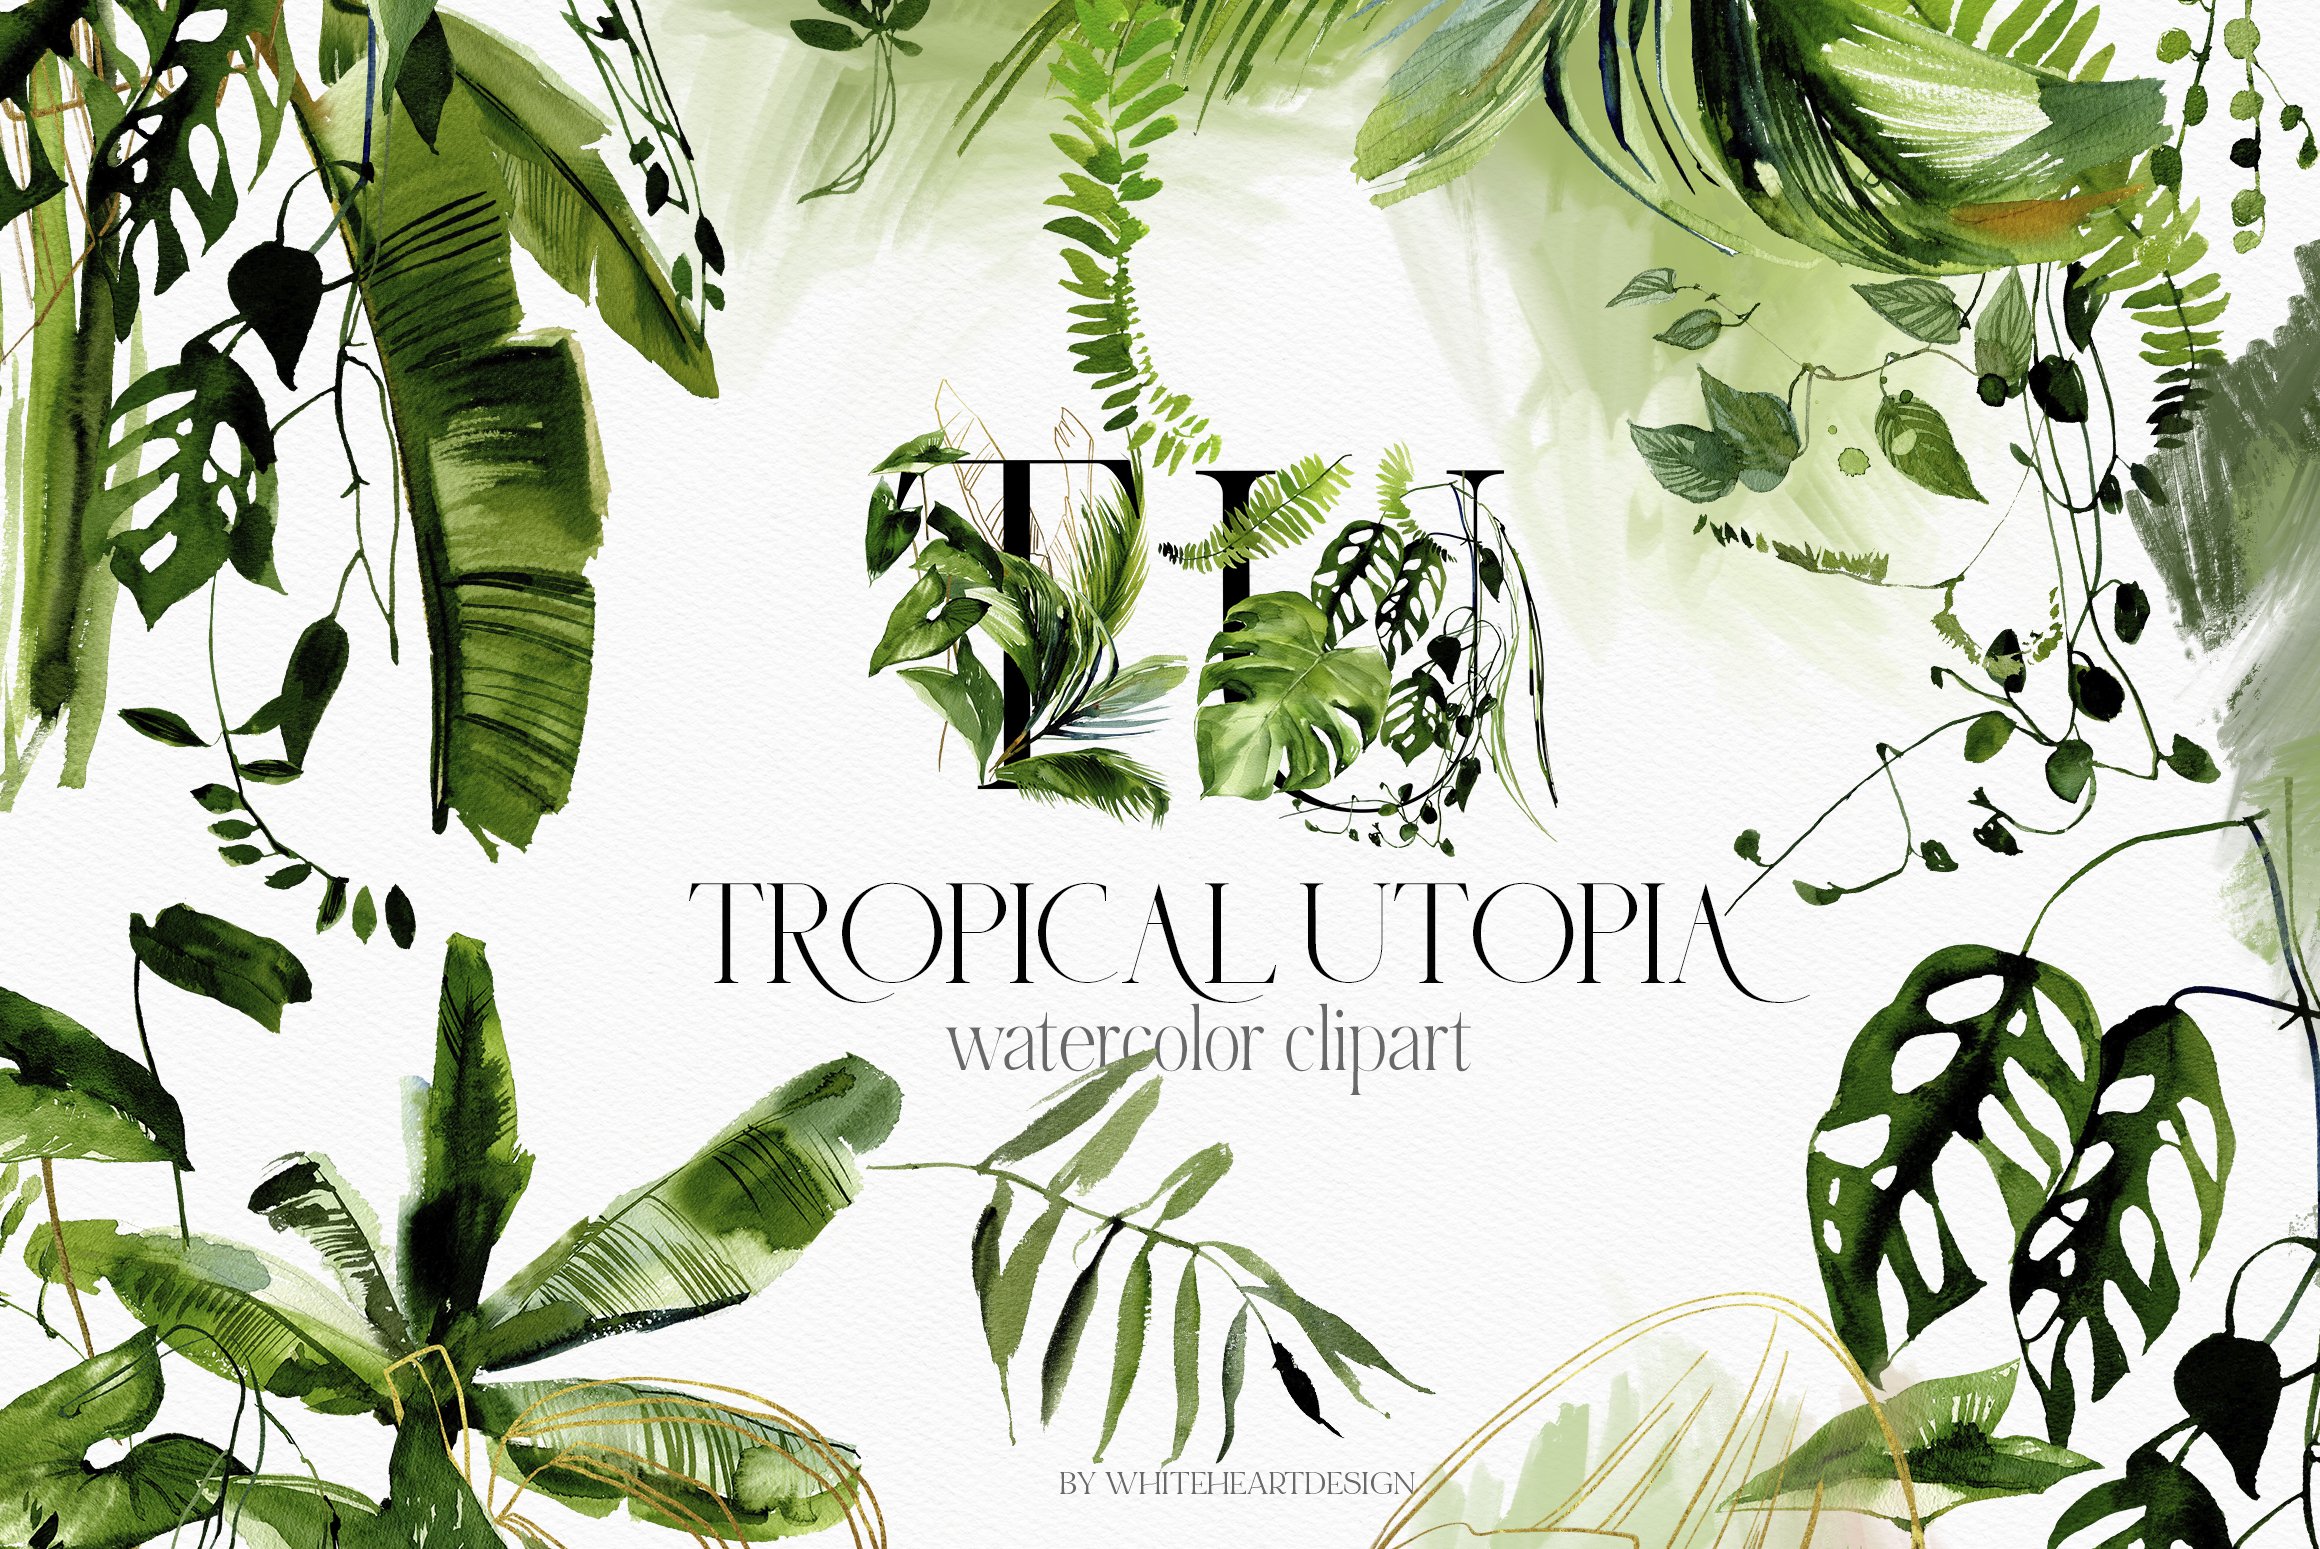 Tropical Greenery Watercolor Clipart cover image.